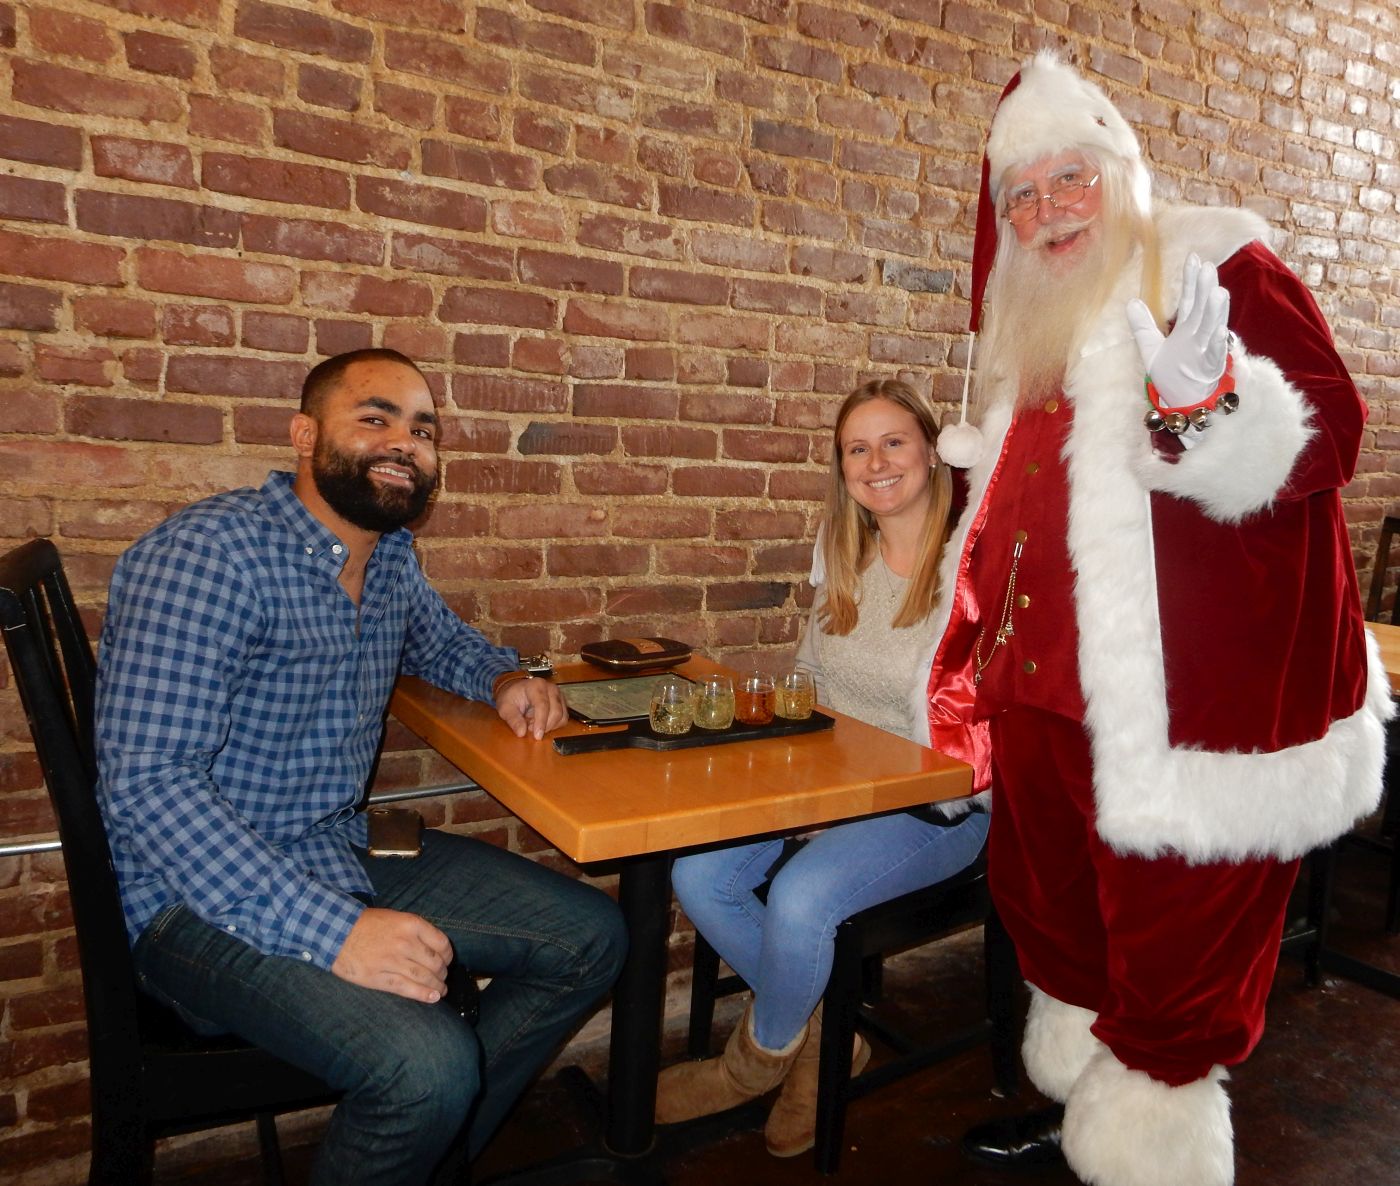 Santa Claus stopped by Haley’s Honey Meadery to say hello to Megan McGrath and Eddie Fischer, who were tasting the four meads on tap.